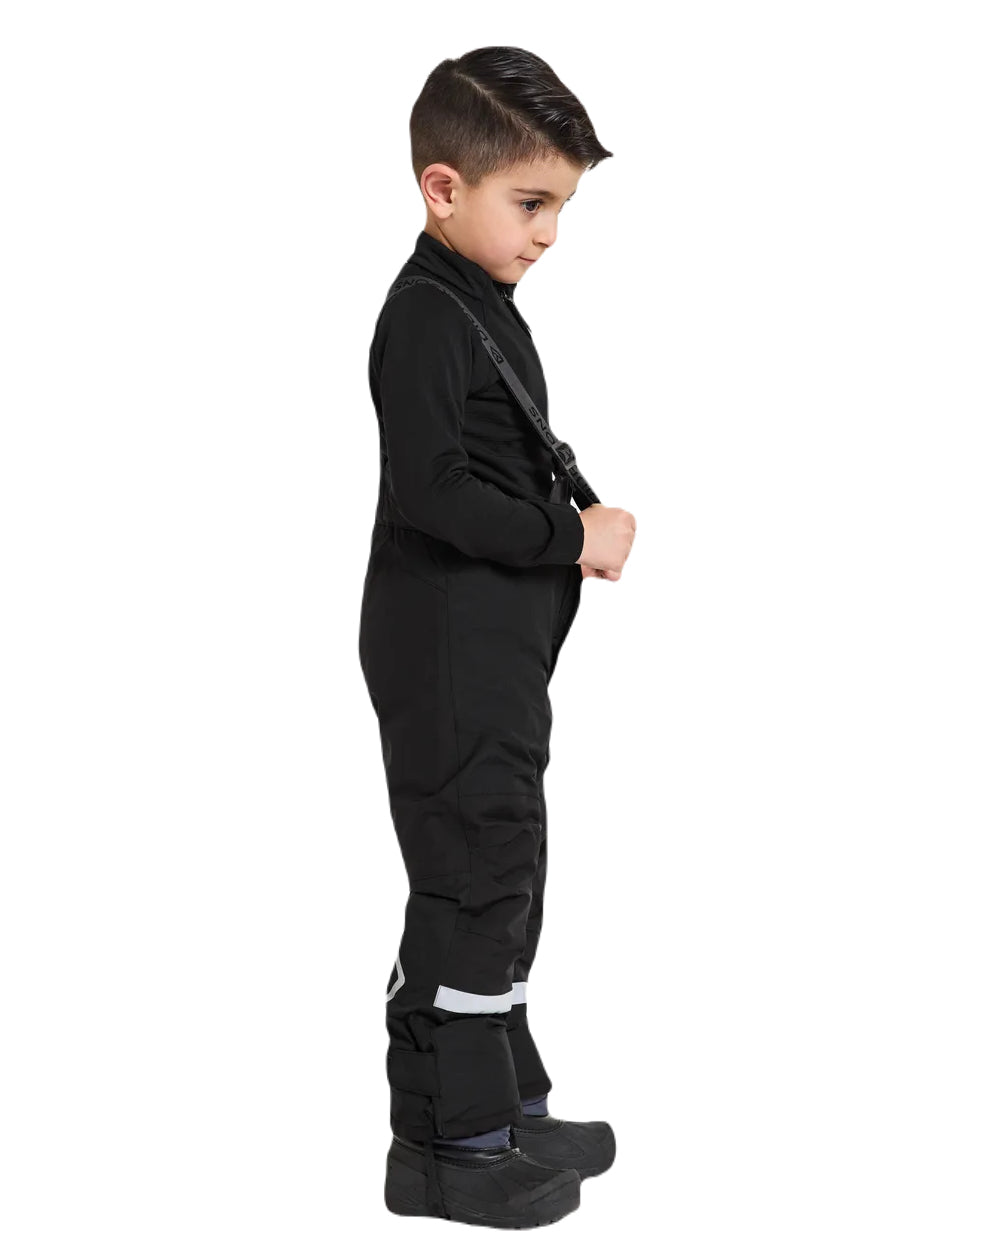 Black Coloured Didriksons Idre Childrens Pants On A White Background 